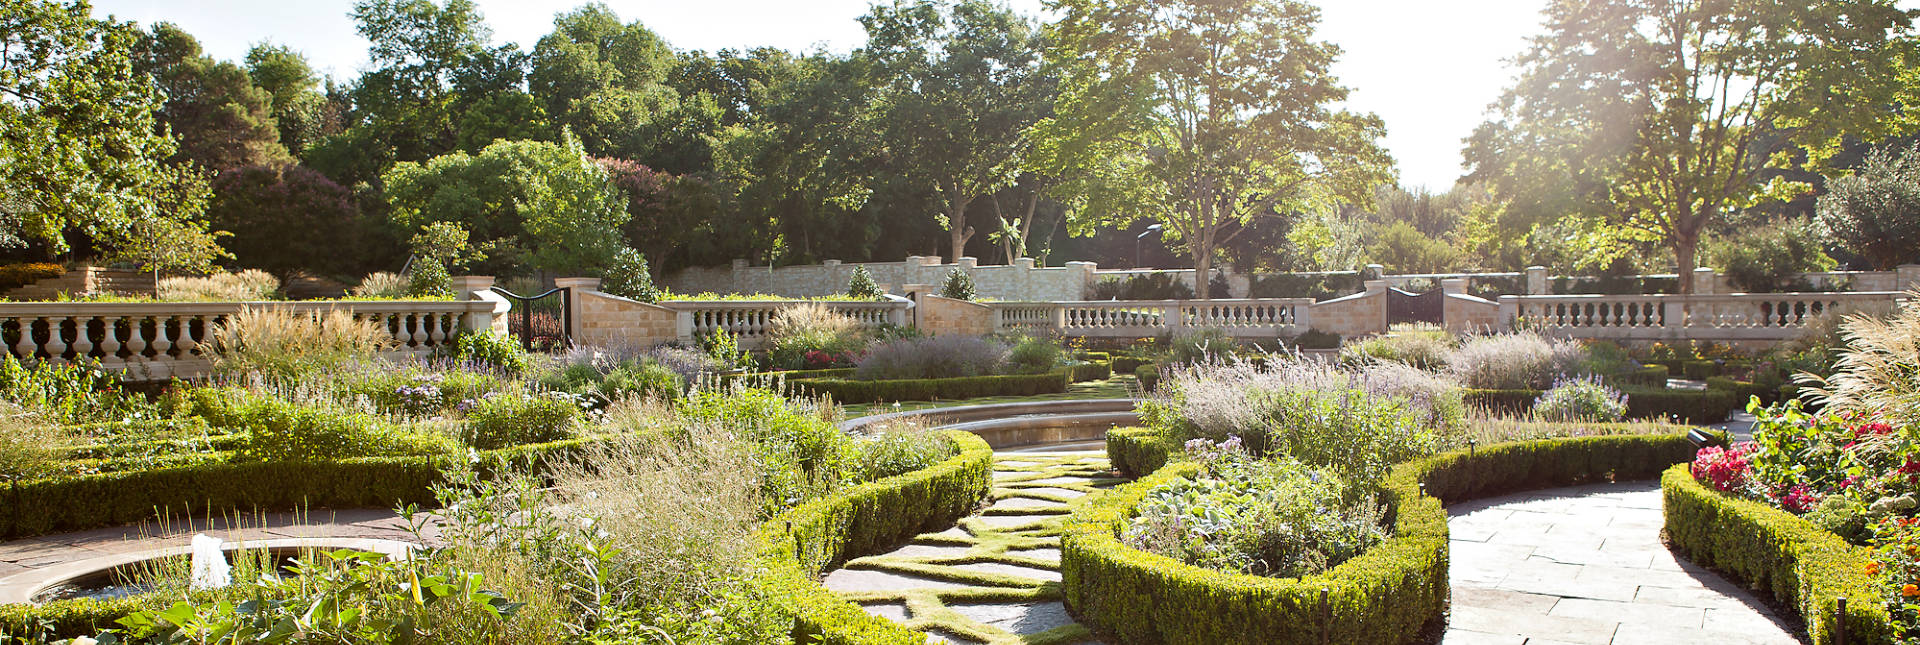 Park Cities Grand Estate | Residential Landscaping Services Company in Dallas, TX